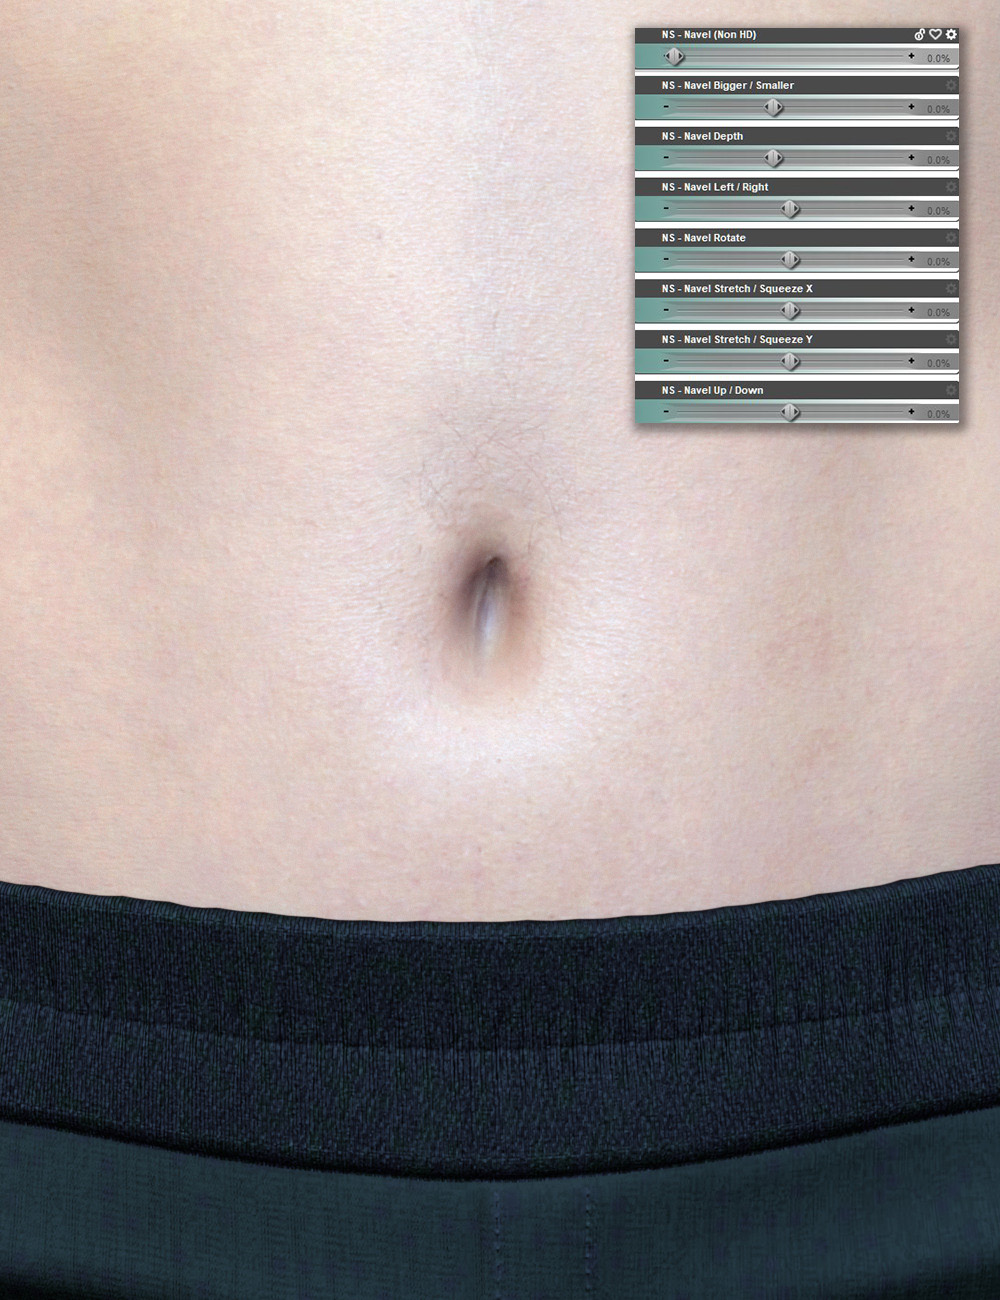 belly button shapes